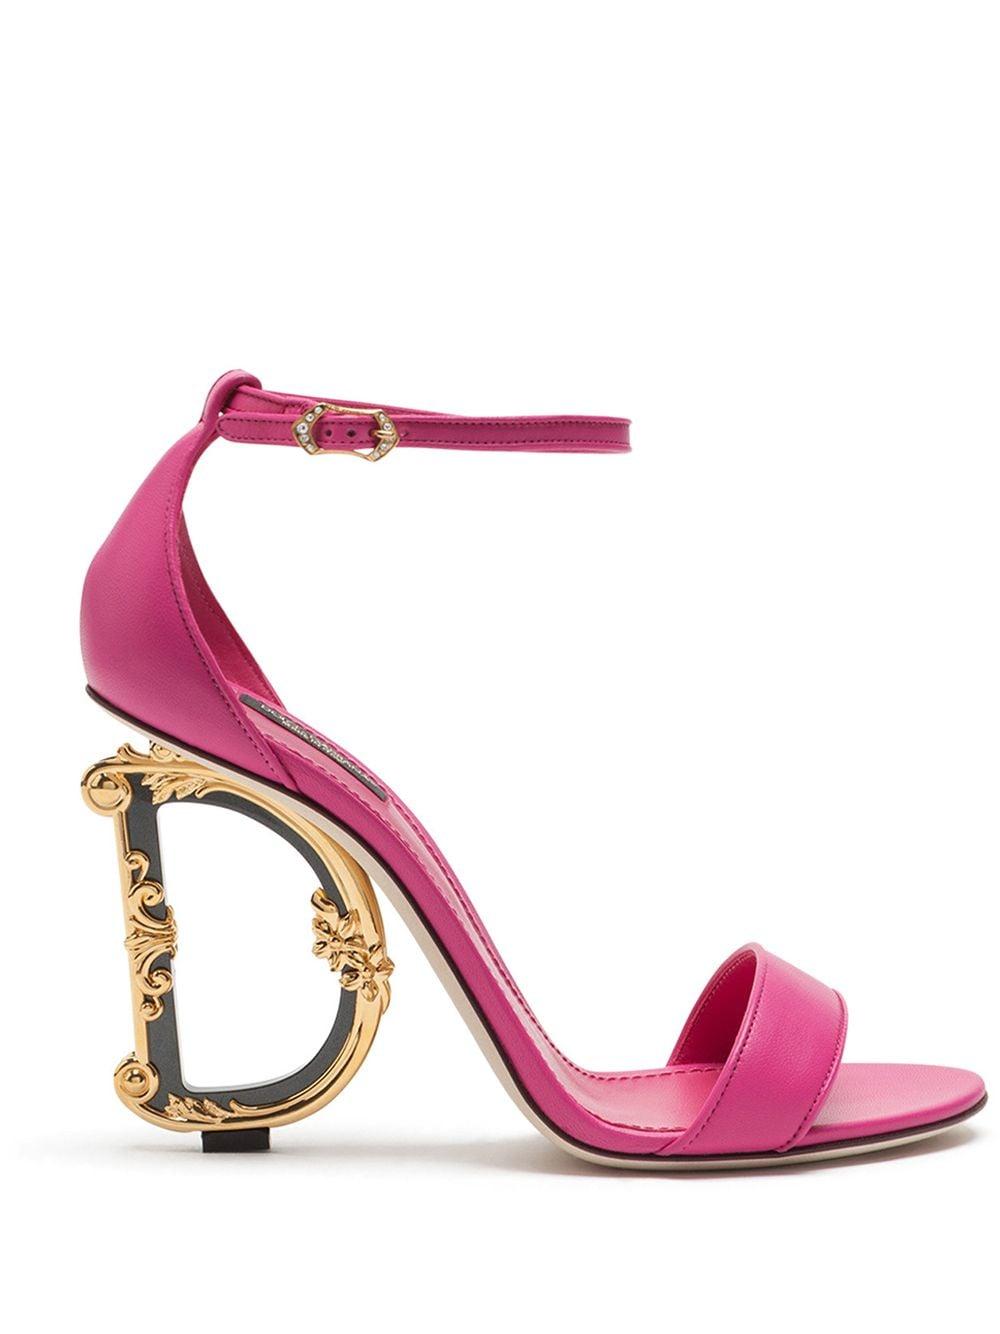 Dolce & Gabbana Leather 105 Mm Keira Baroque Logo Sandals in Pink ...